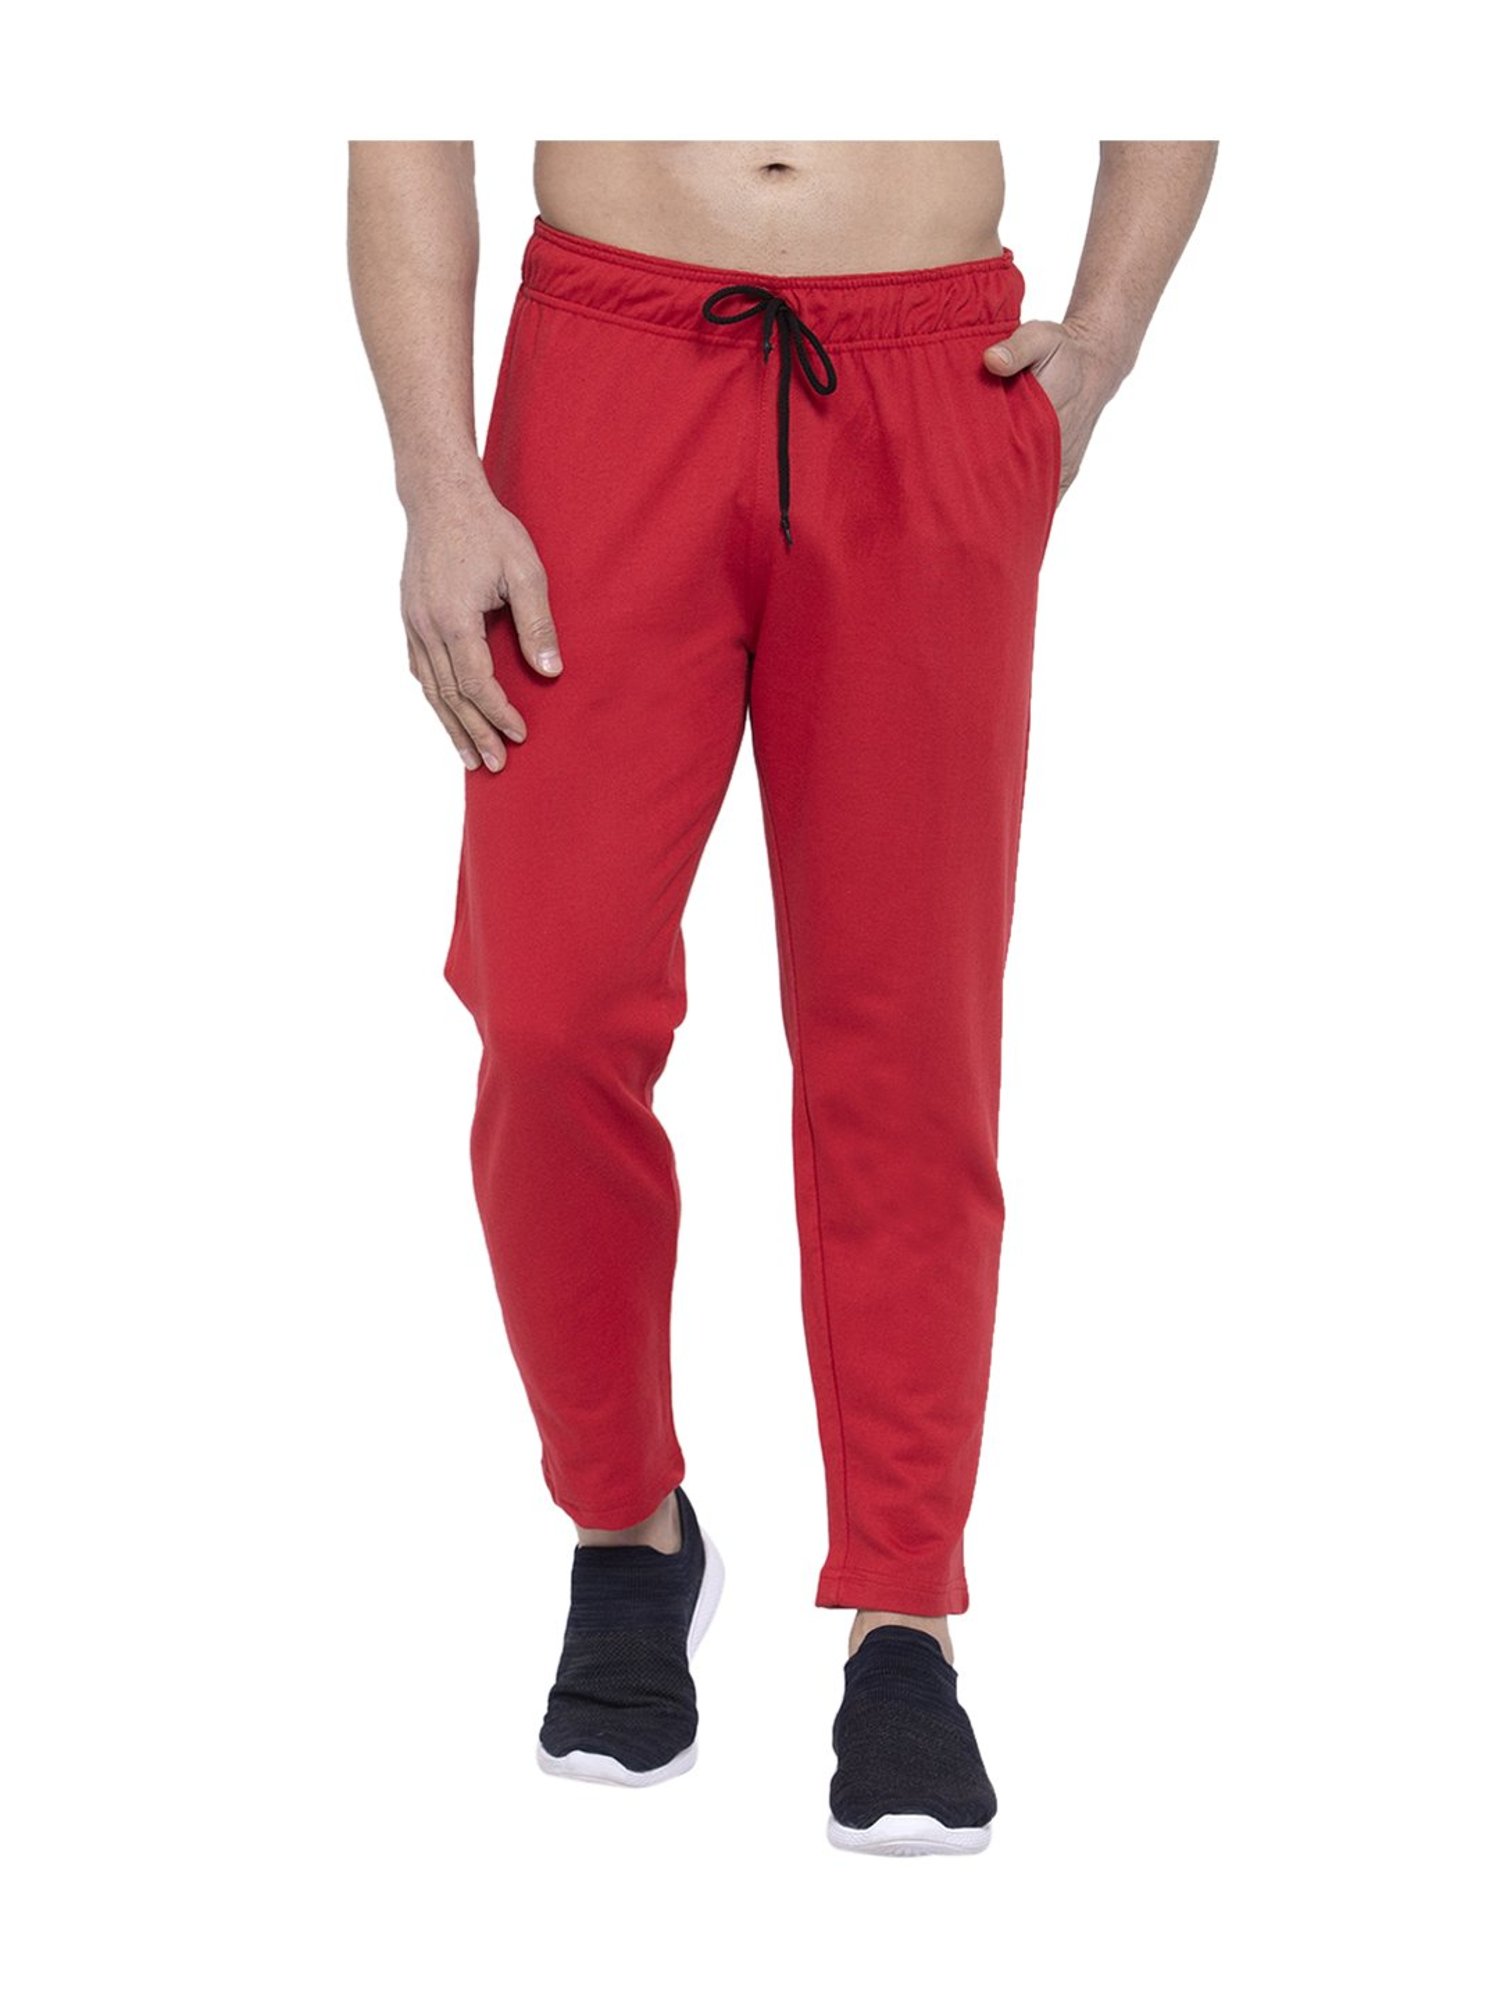 fcityin  Handsome Simple Hosiery Cotton Blend Track Pants Combo  Mens